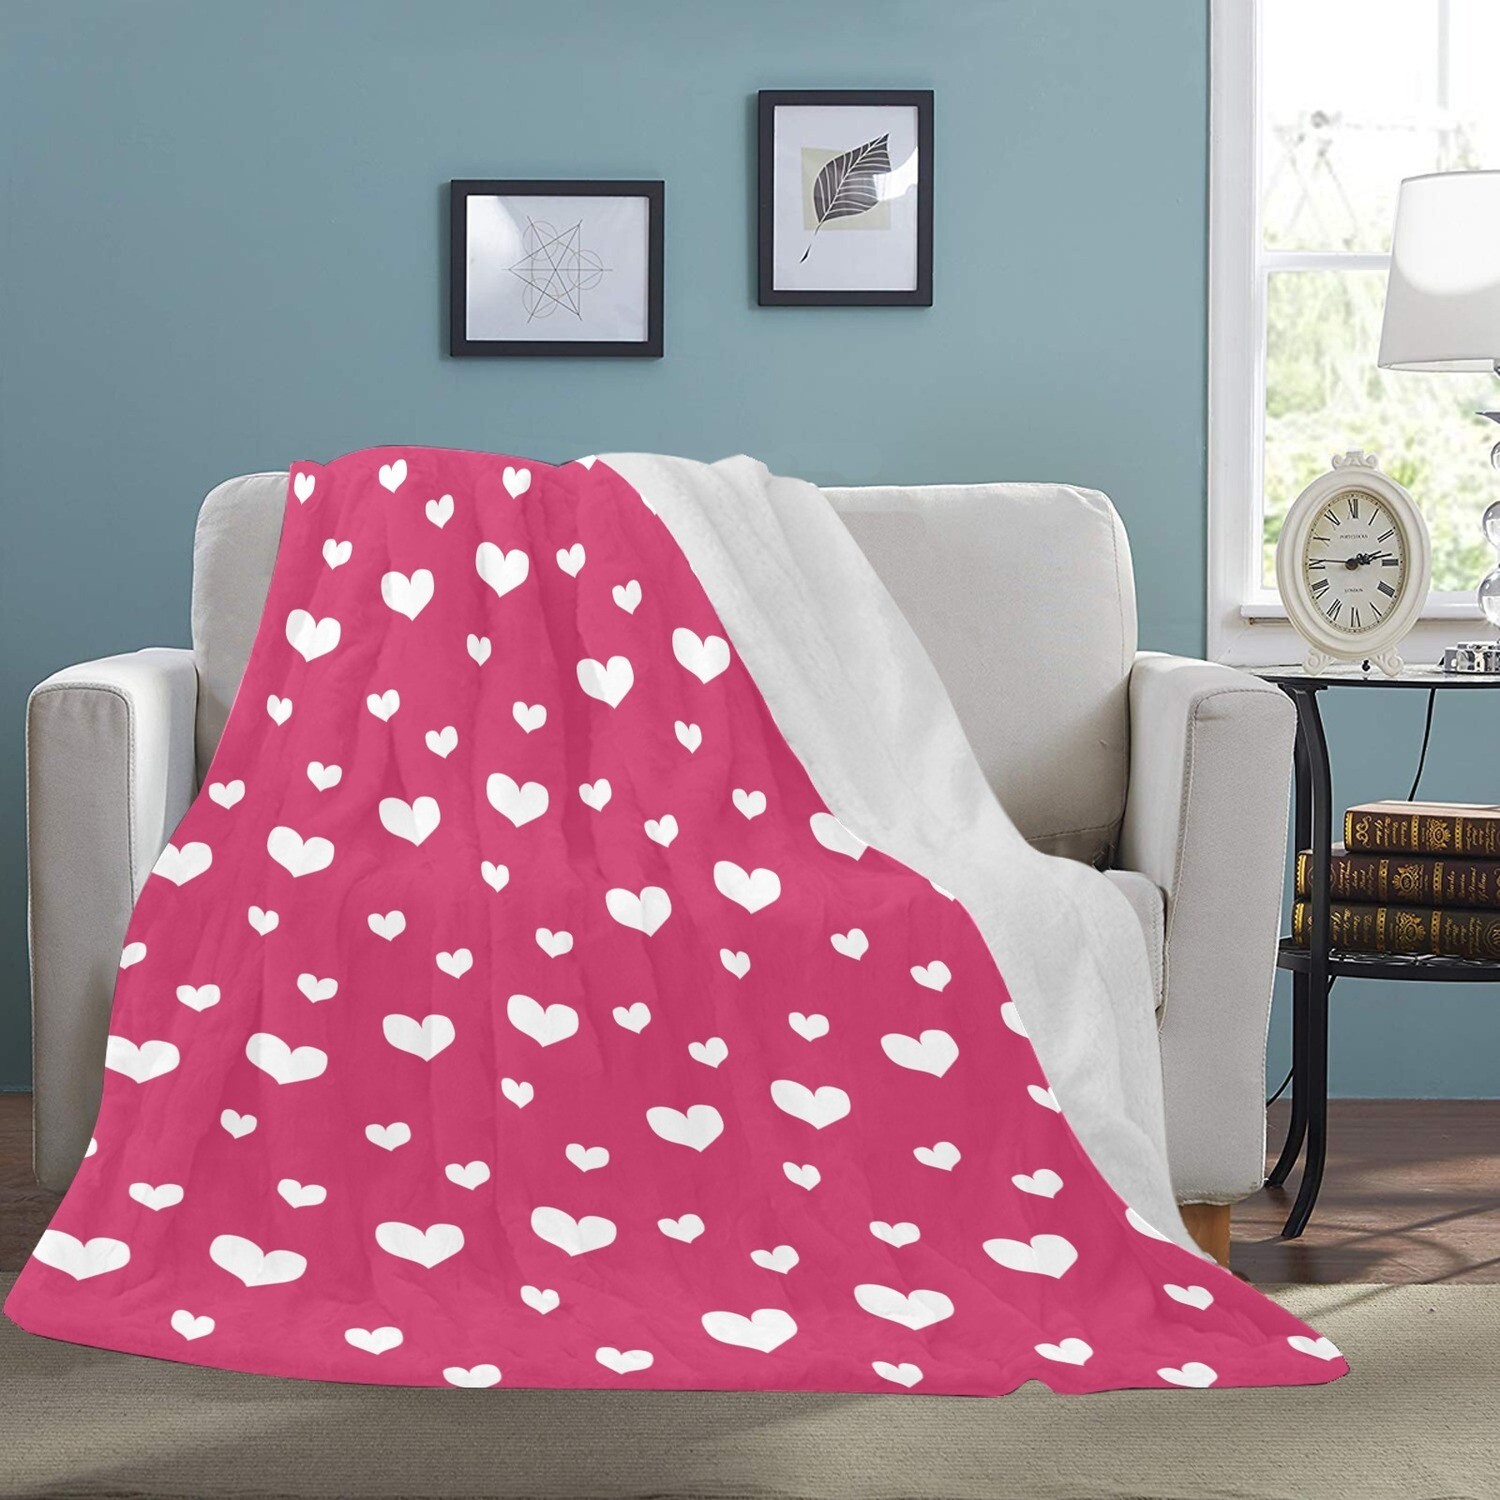 🤴🏽👸🏽💕Large Ultra-Soft Micro Fleece Blanket Valentine white hearts on raspberry sorbet pink, gift, gift for her, gift for him, gift for them, 70"x80"